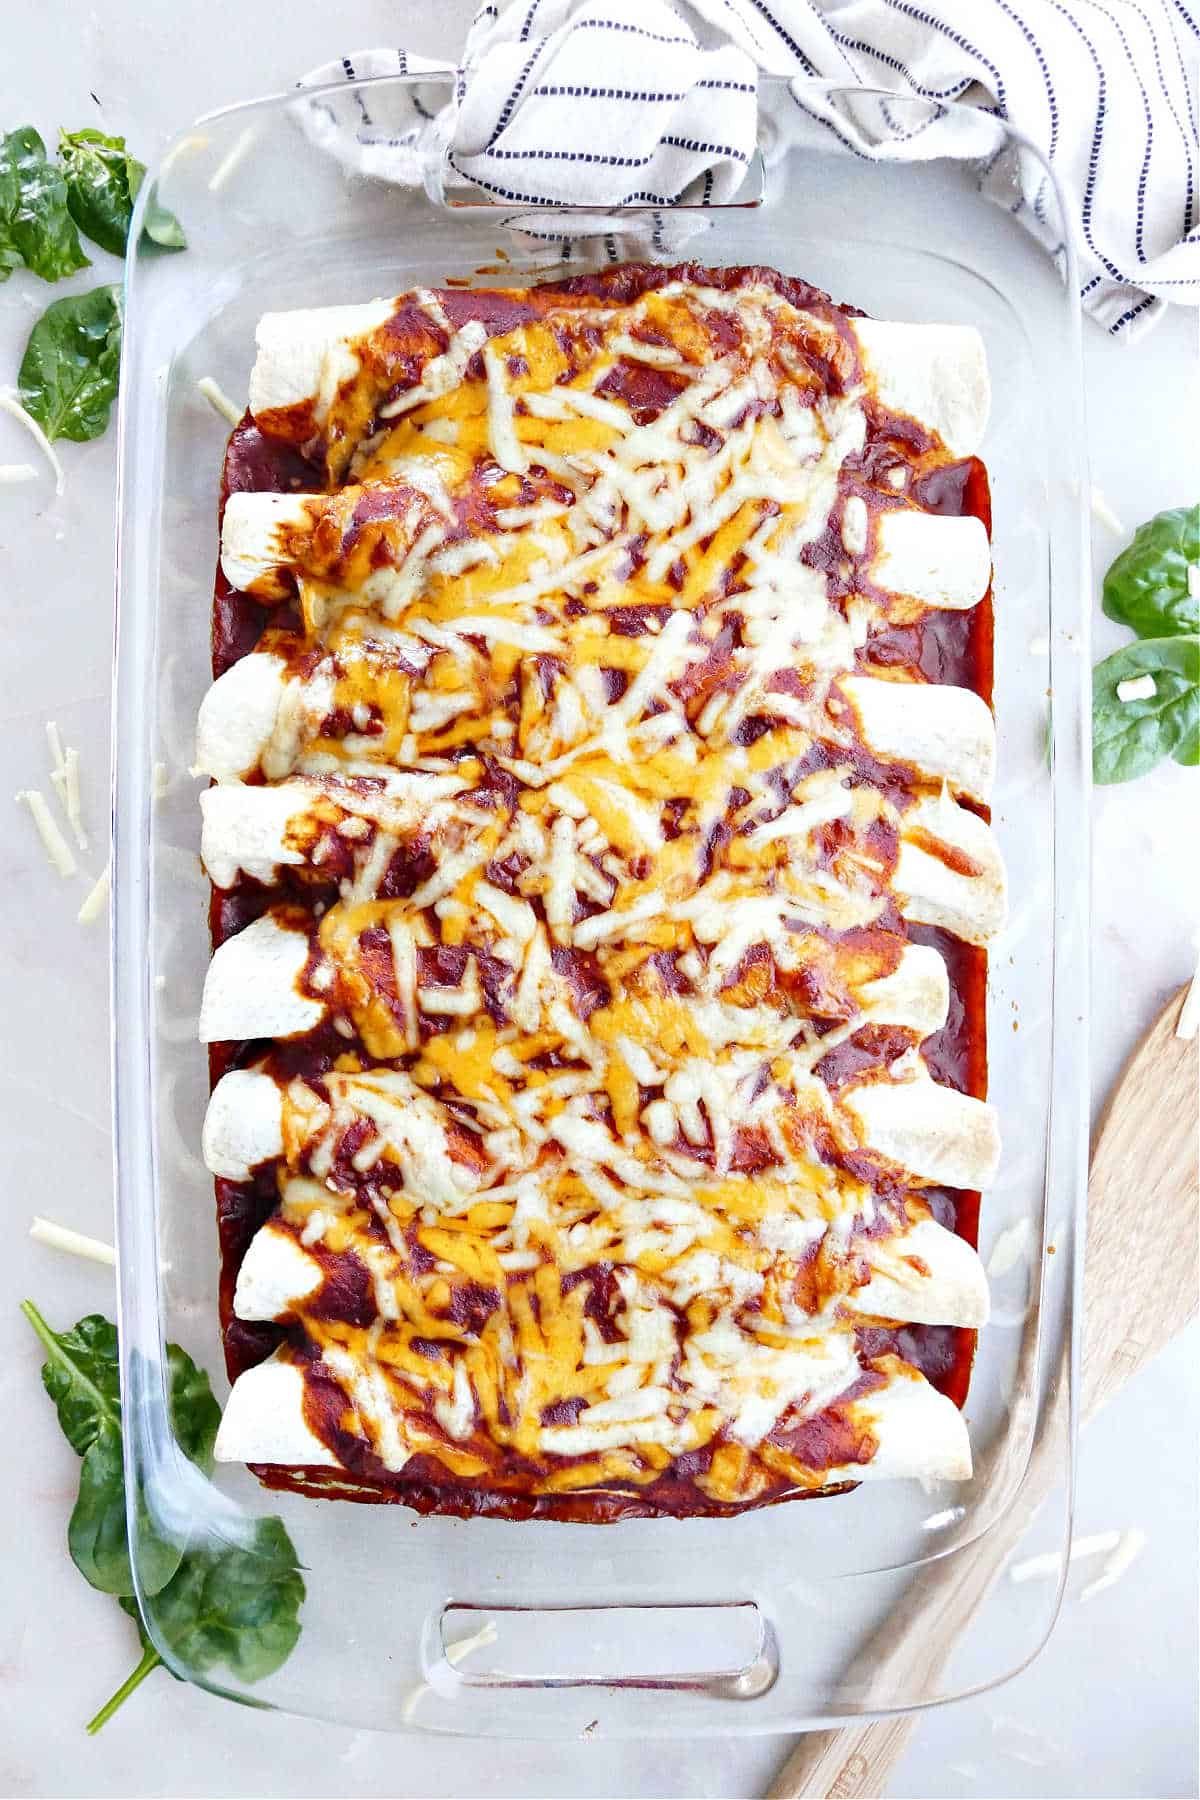 black bean and spinach enchiladas assembled in a rectangular baking dish on a counter